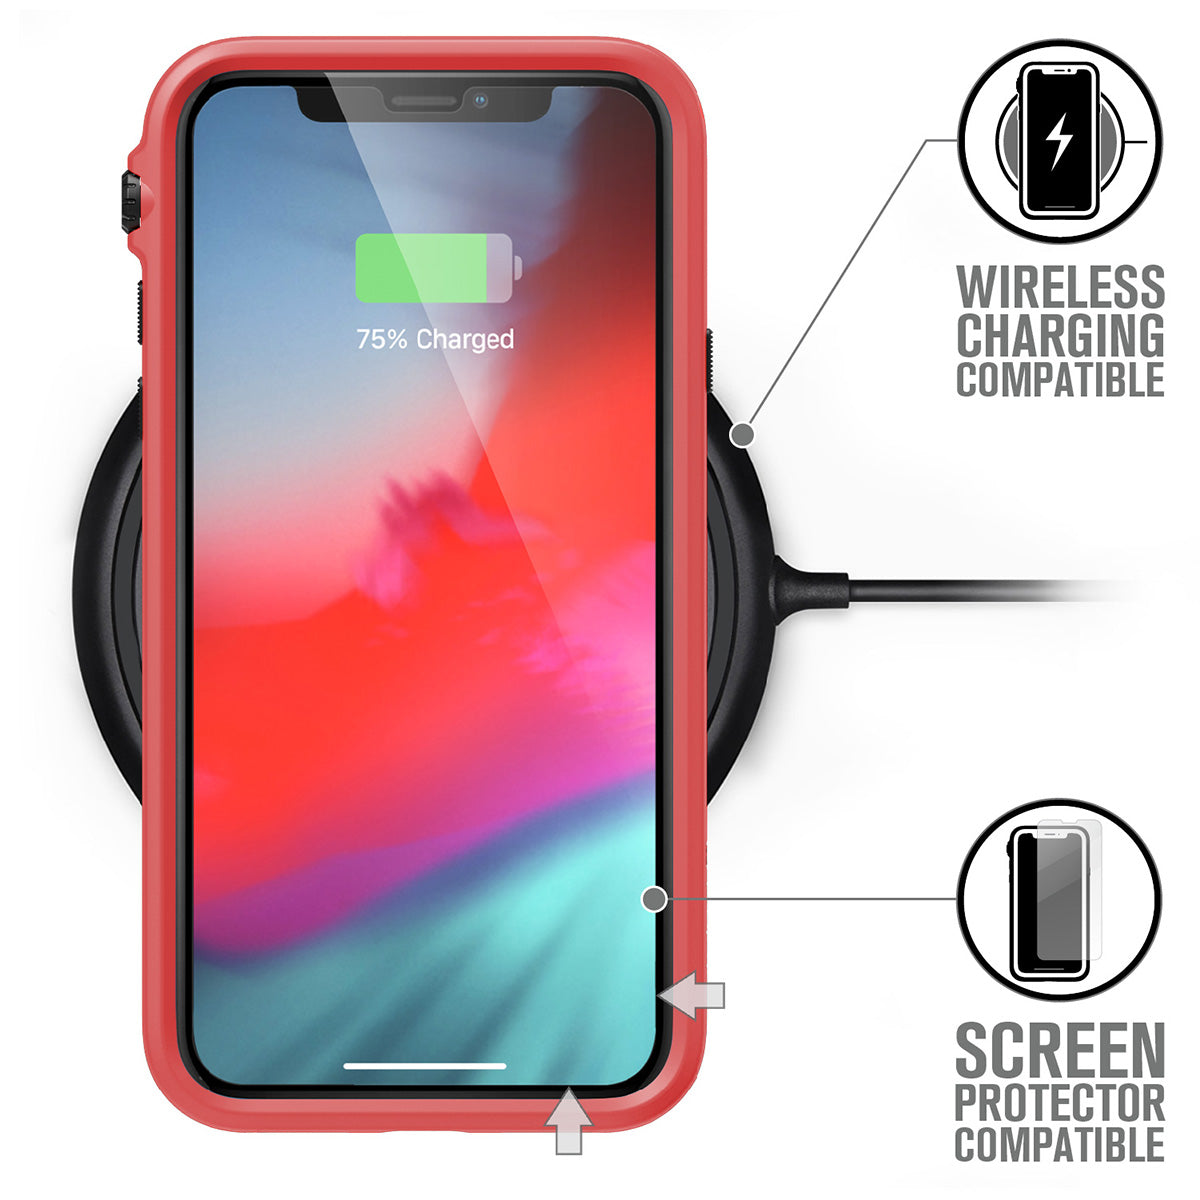 Catalyst Impact Protection Case for iPhone X/XR/Xs/Xs Max showing the iphone screen with the catalyst case installed on a wireless charger text reads wireless chaging compatible screen protector compatible